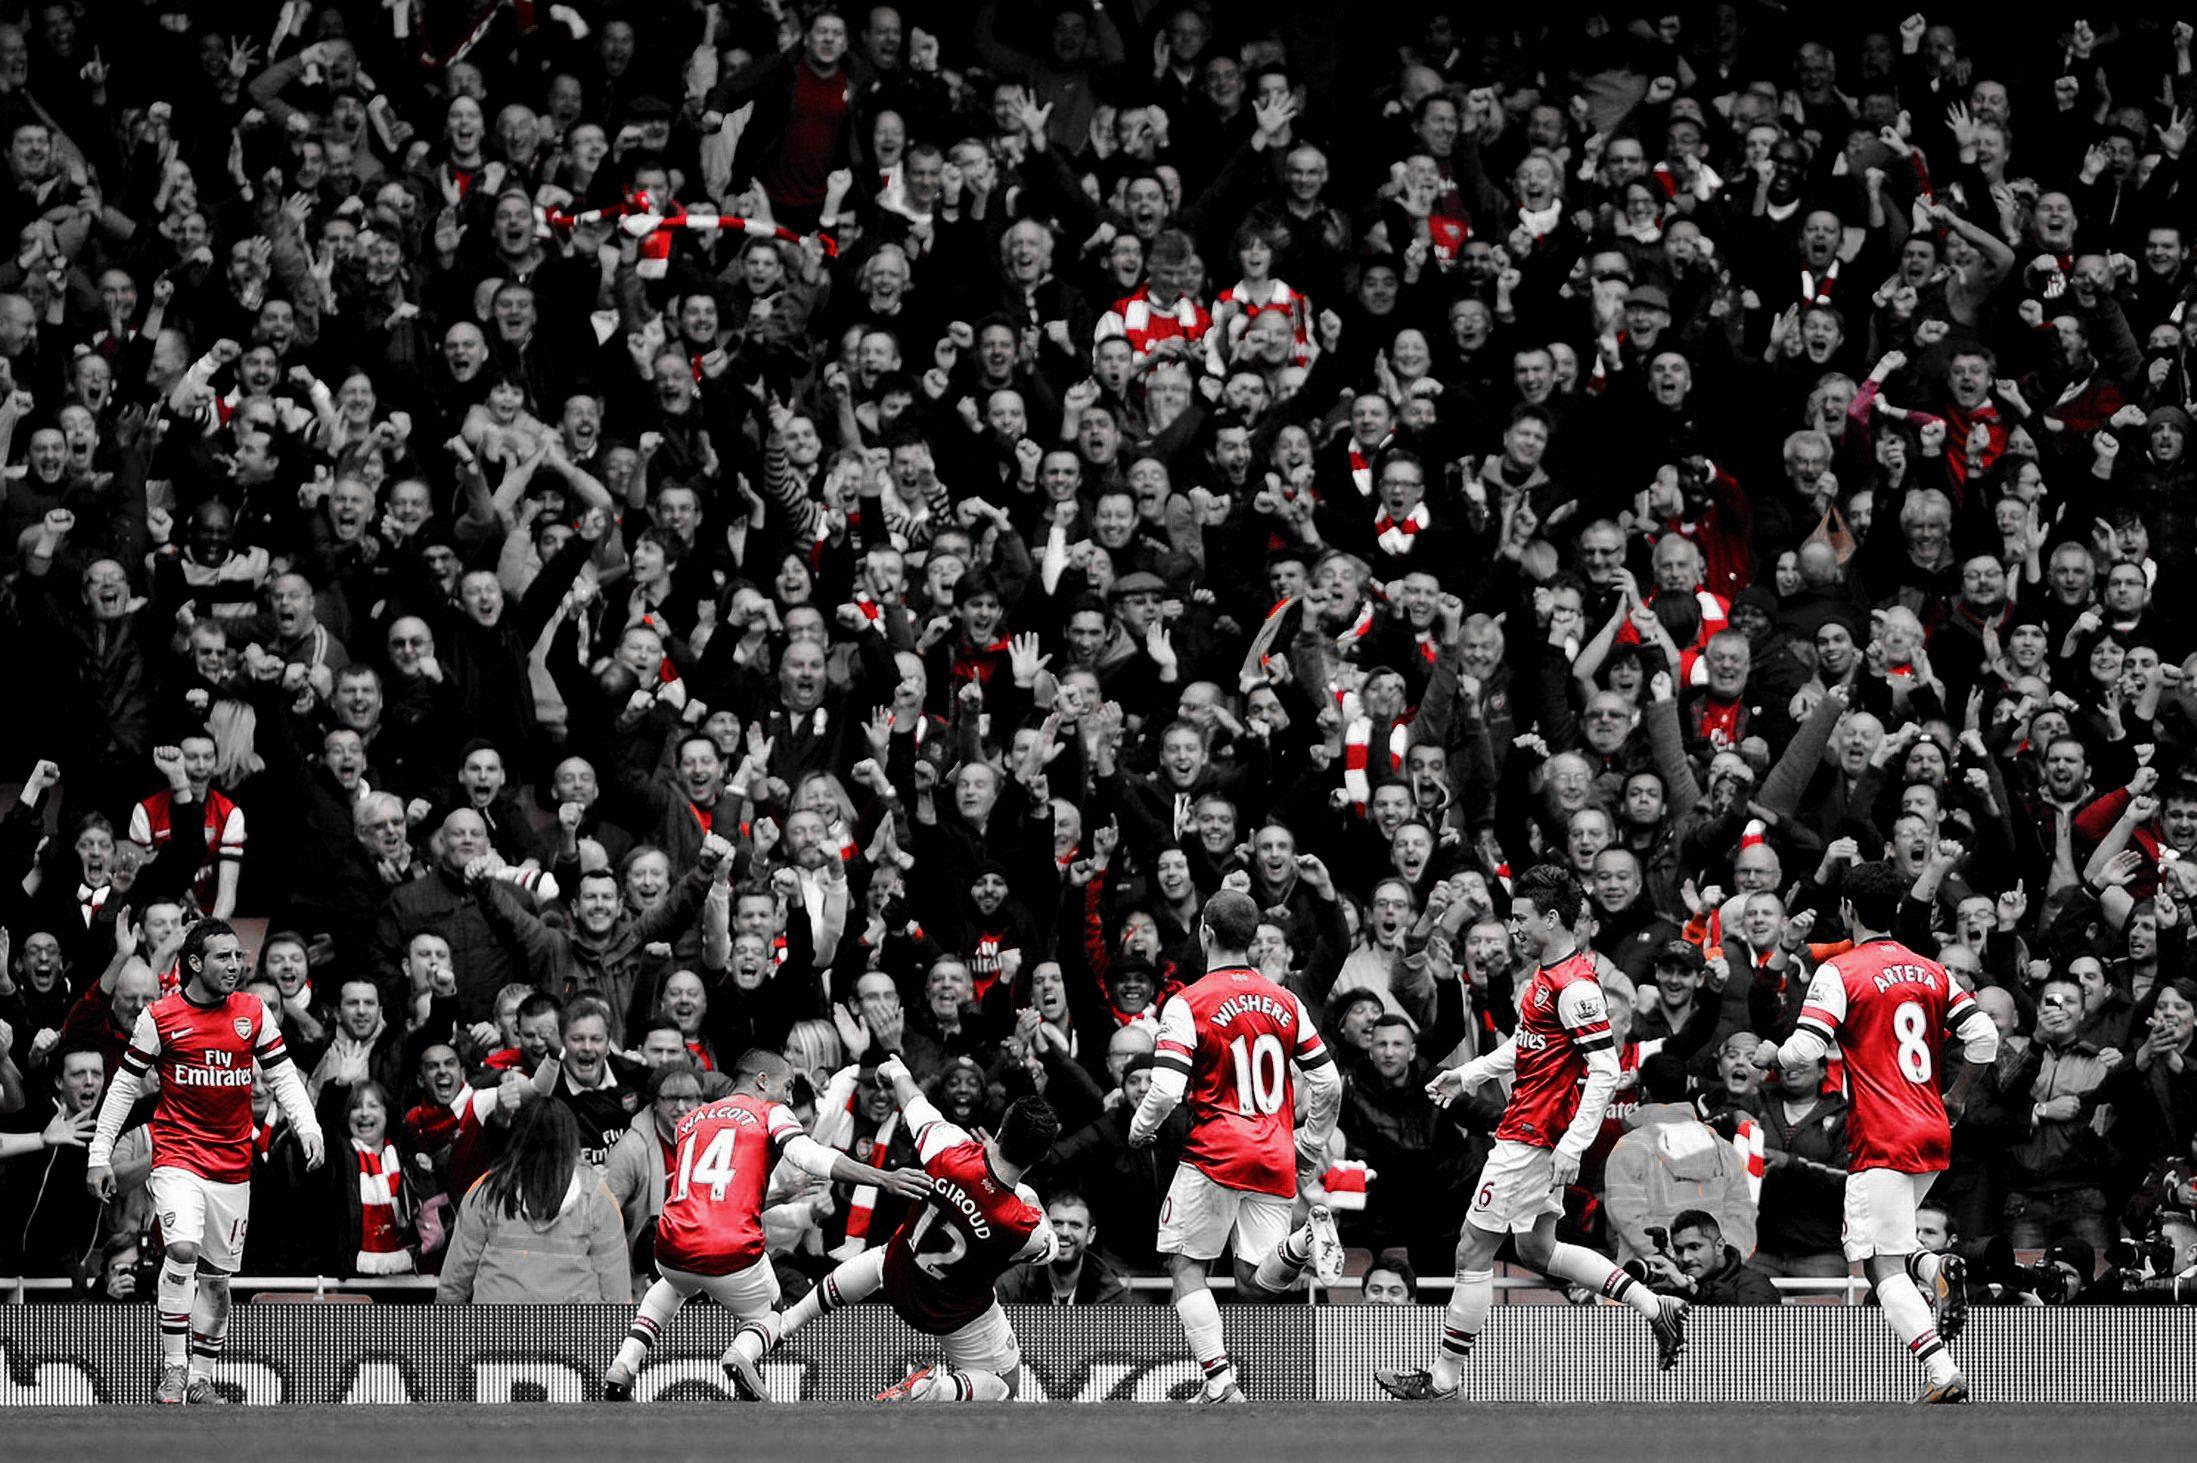 Here, have a free wallpaper in memory of our win :)